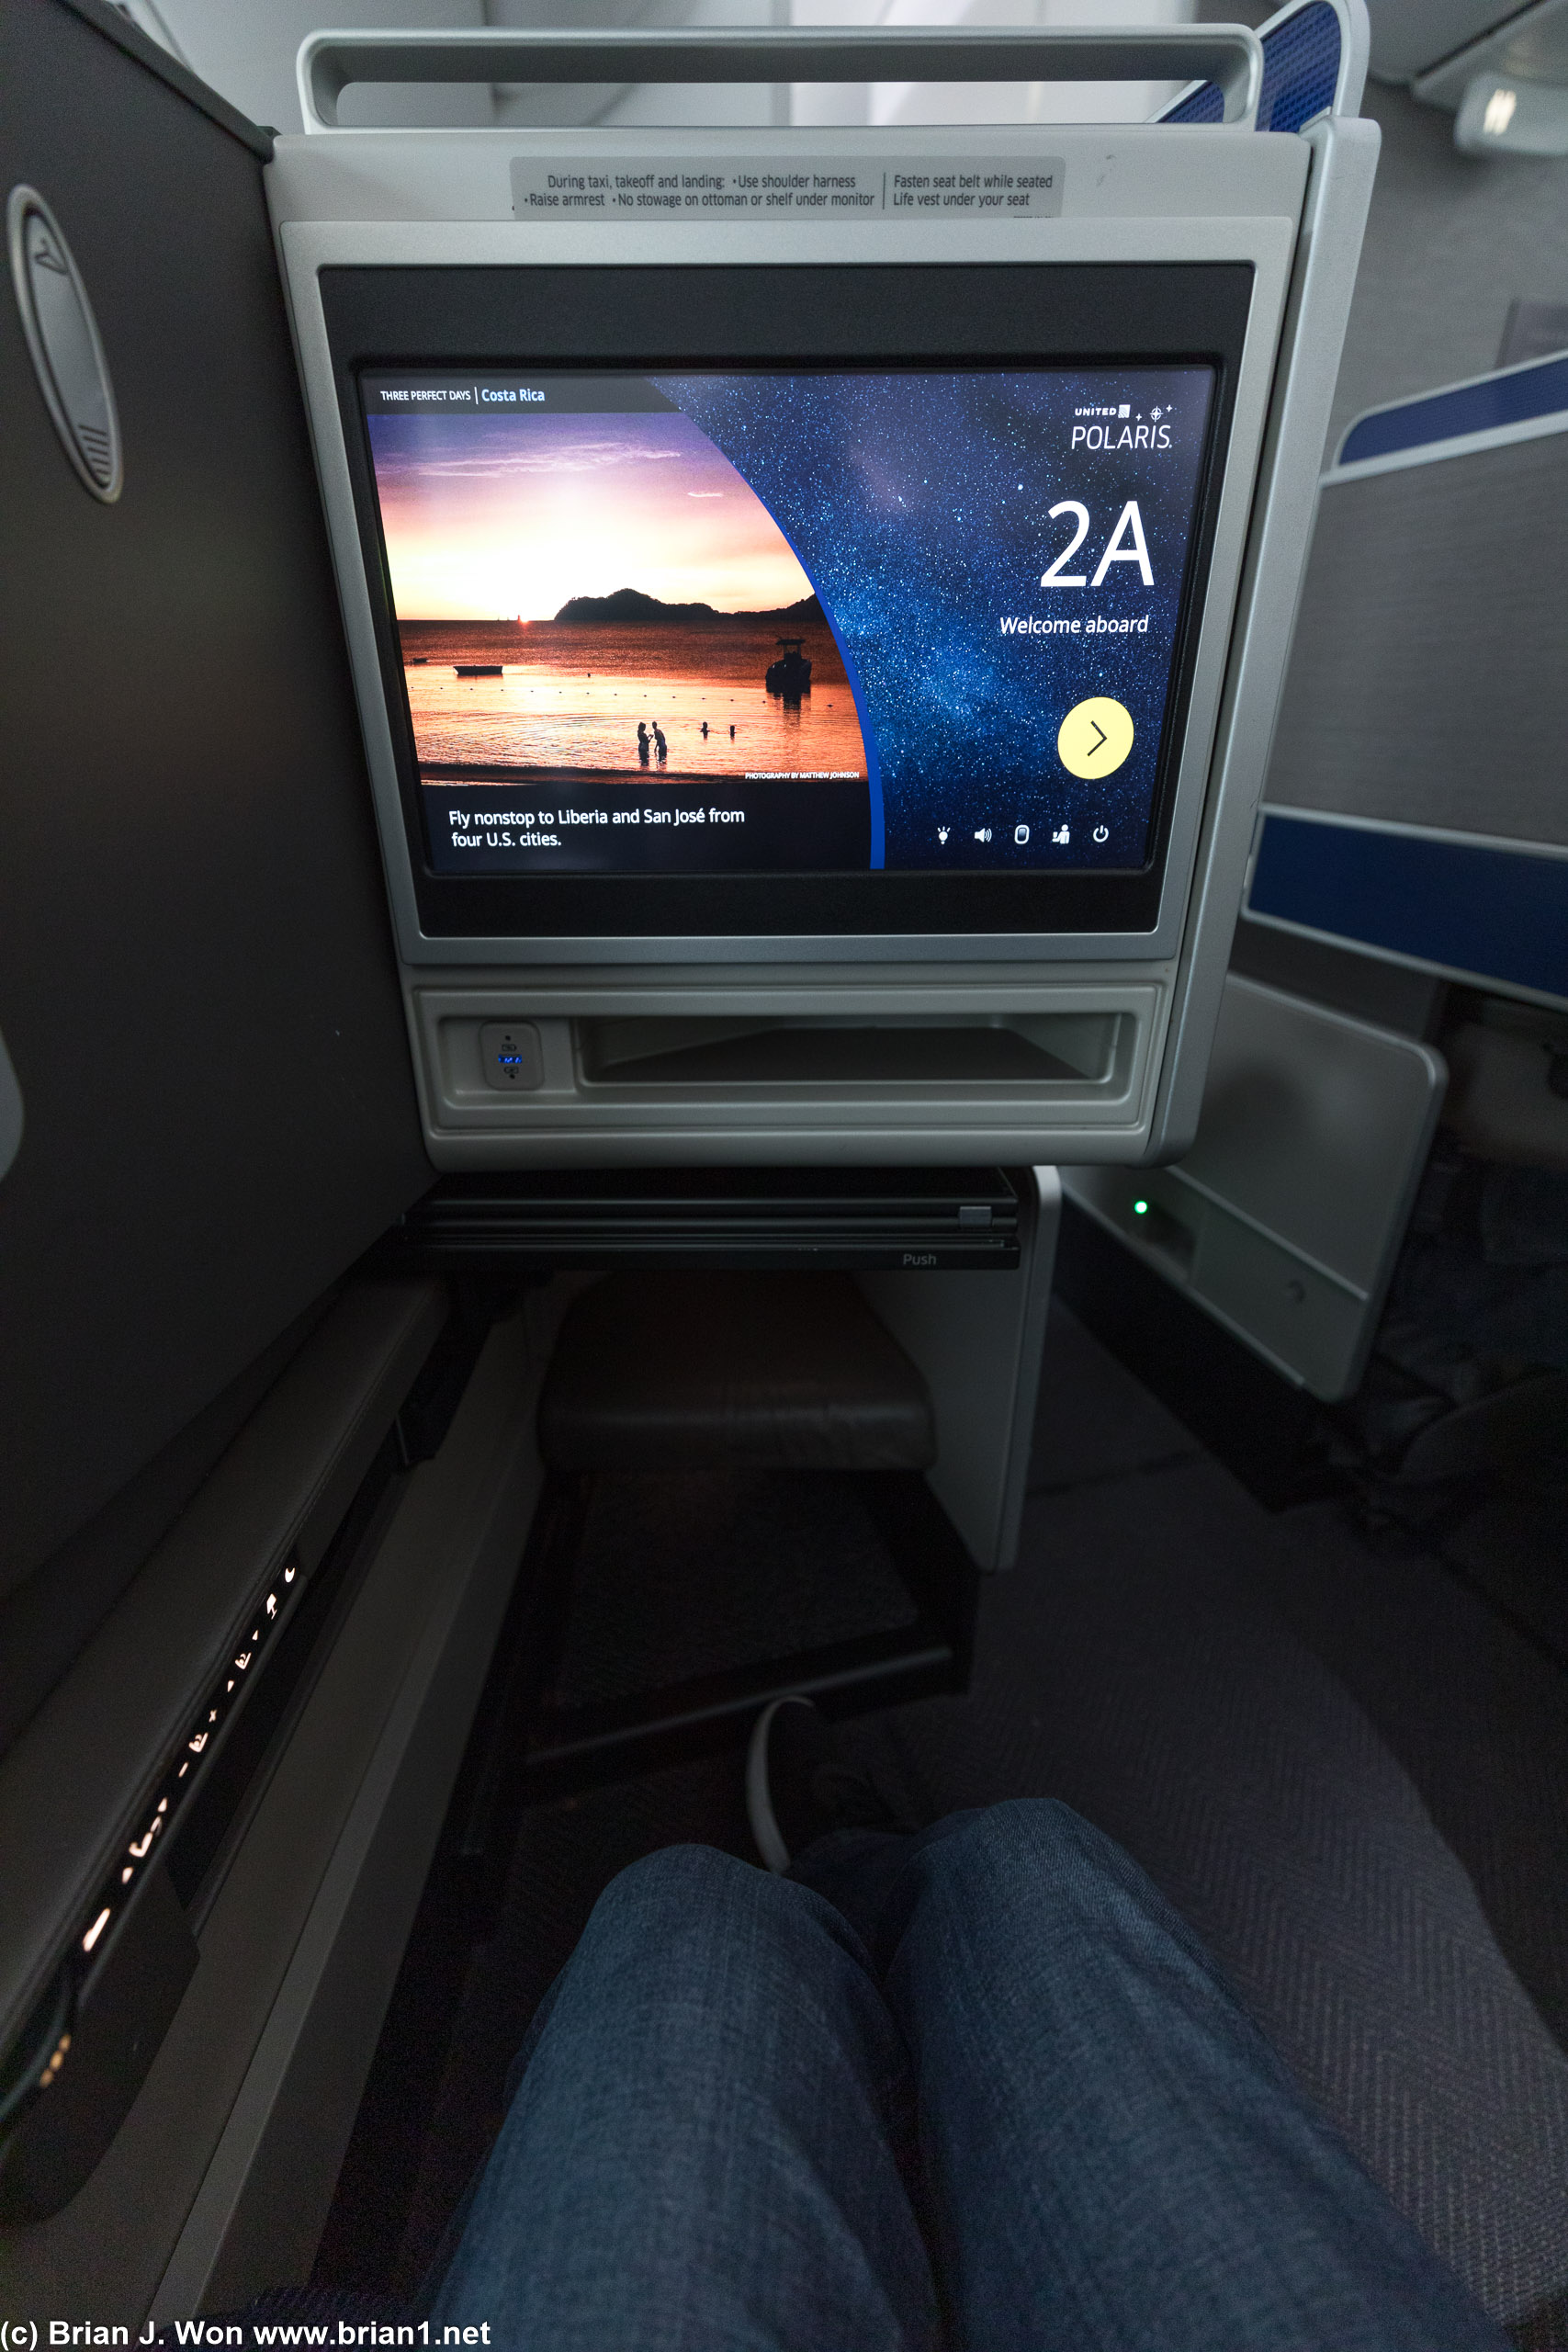 Seats are definitely narrower on the 787 than on the 777.